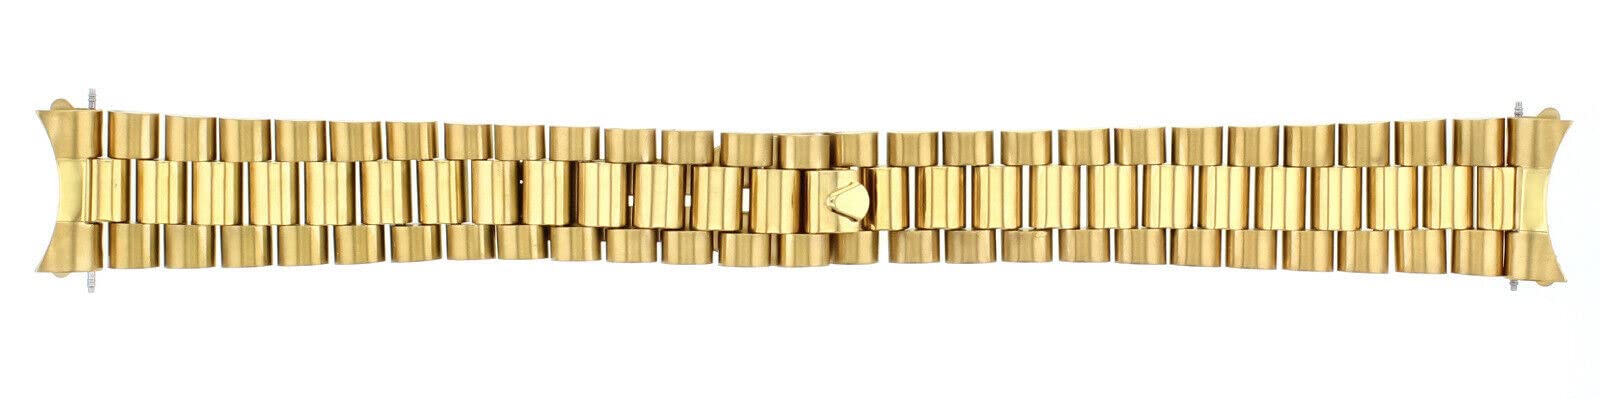 Ewatchparts PRESIDENT WATCH BAND SOLID BRACELET COMPATIBLE WITH 34MM ROLEX DATE WATCH 19MM GOLD GP